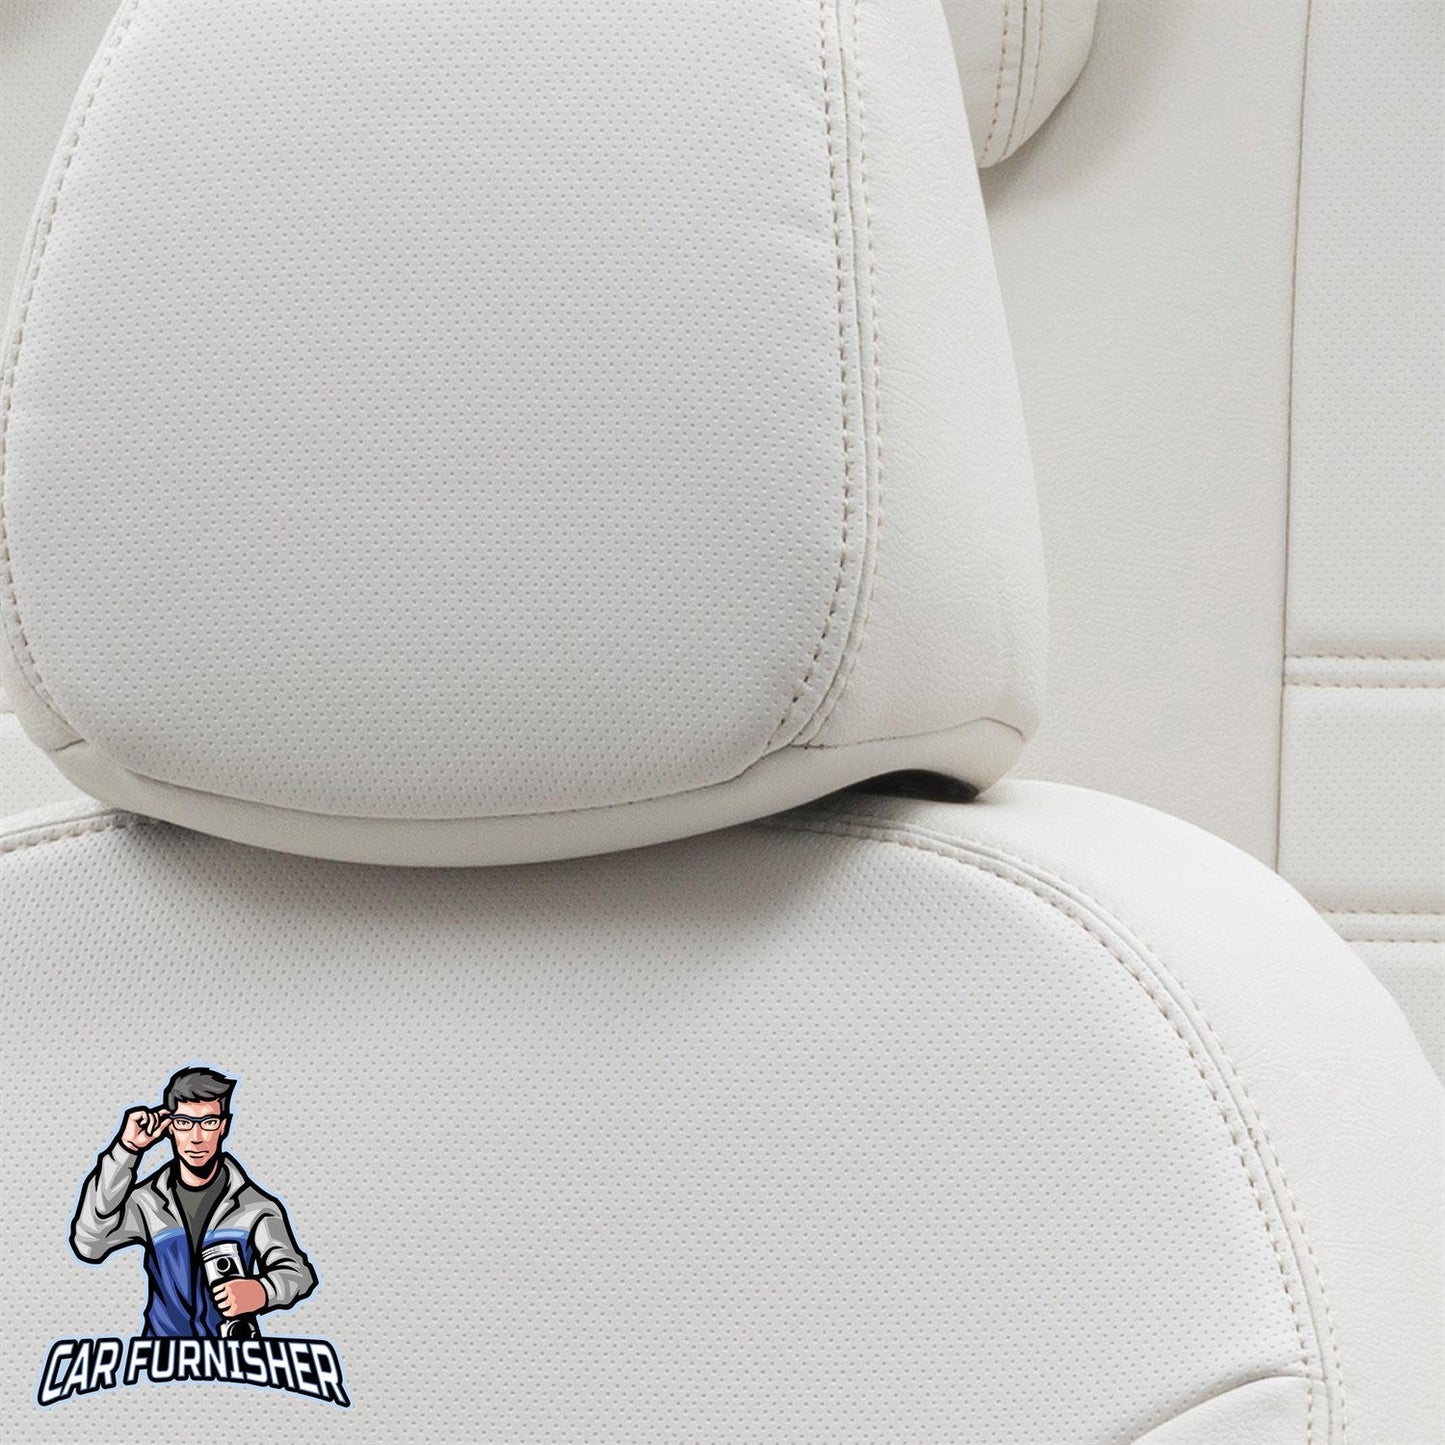 Kia Sportage Seat Covers Istanbul Leather Design Ivory Leather